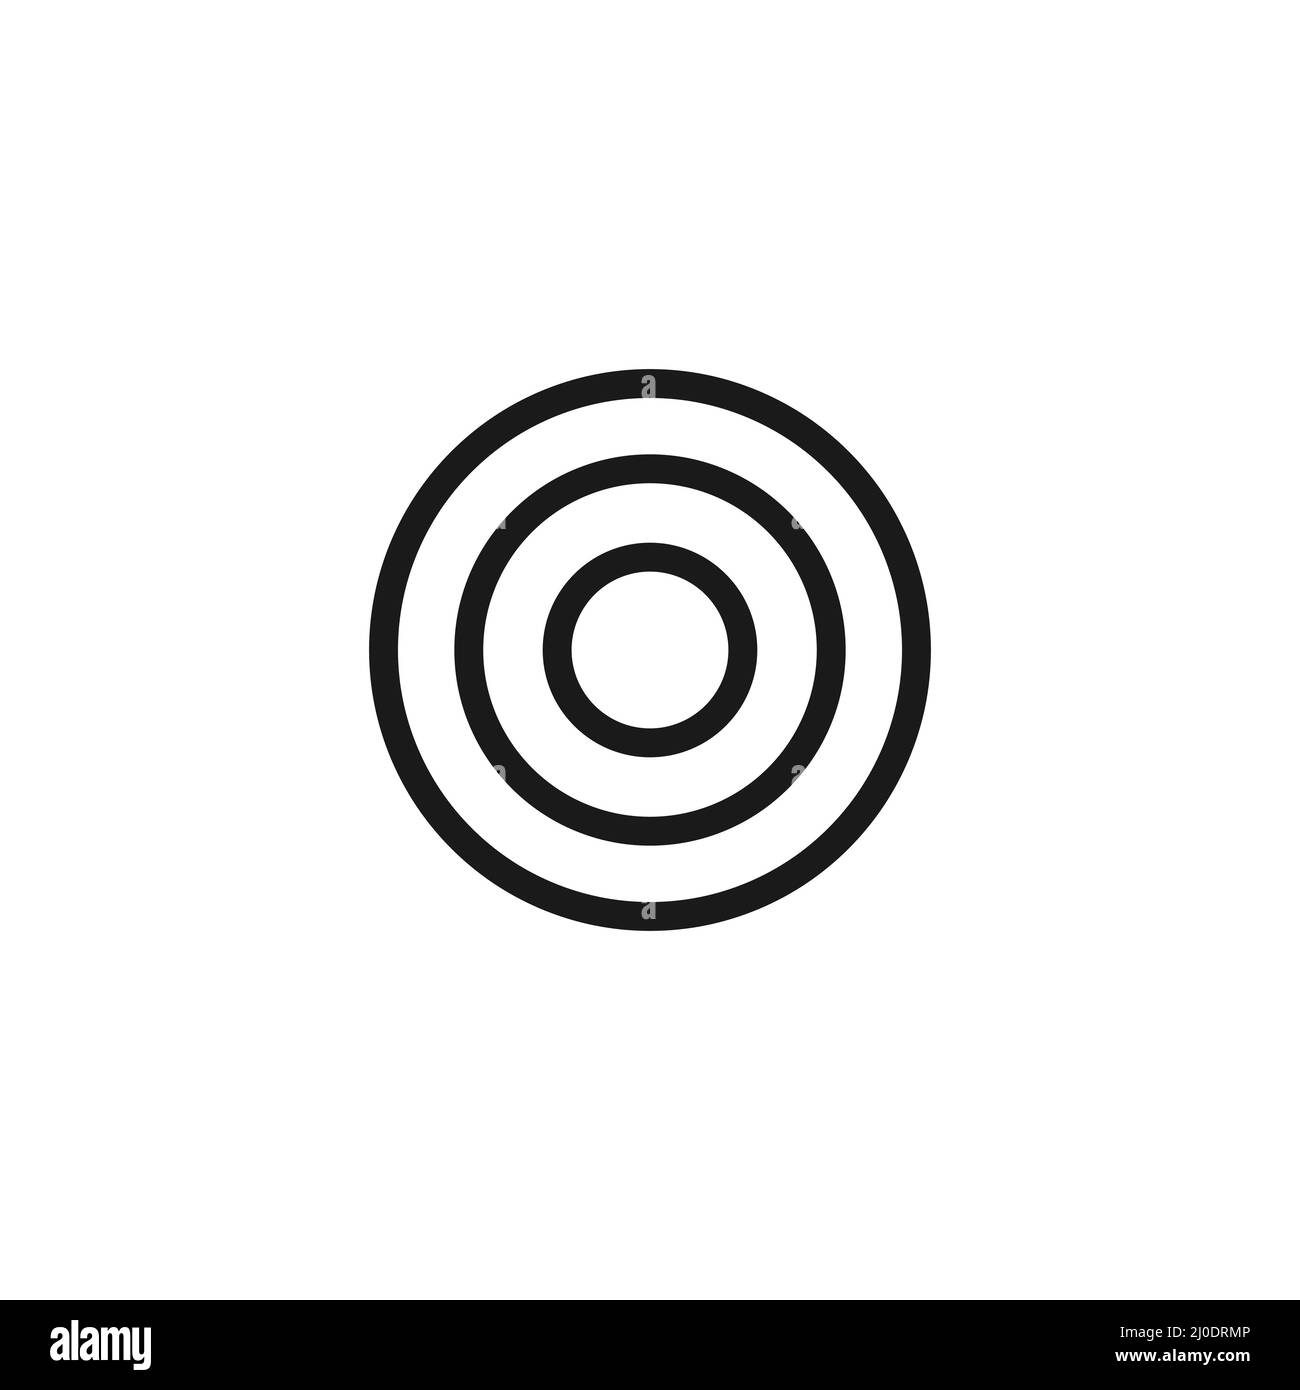 Target red icon. Goal symbol. Marketing or business aim. Stock Vector